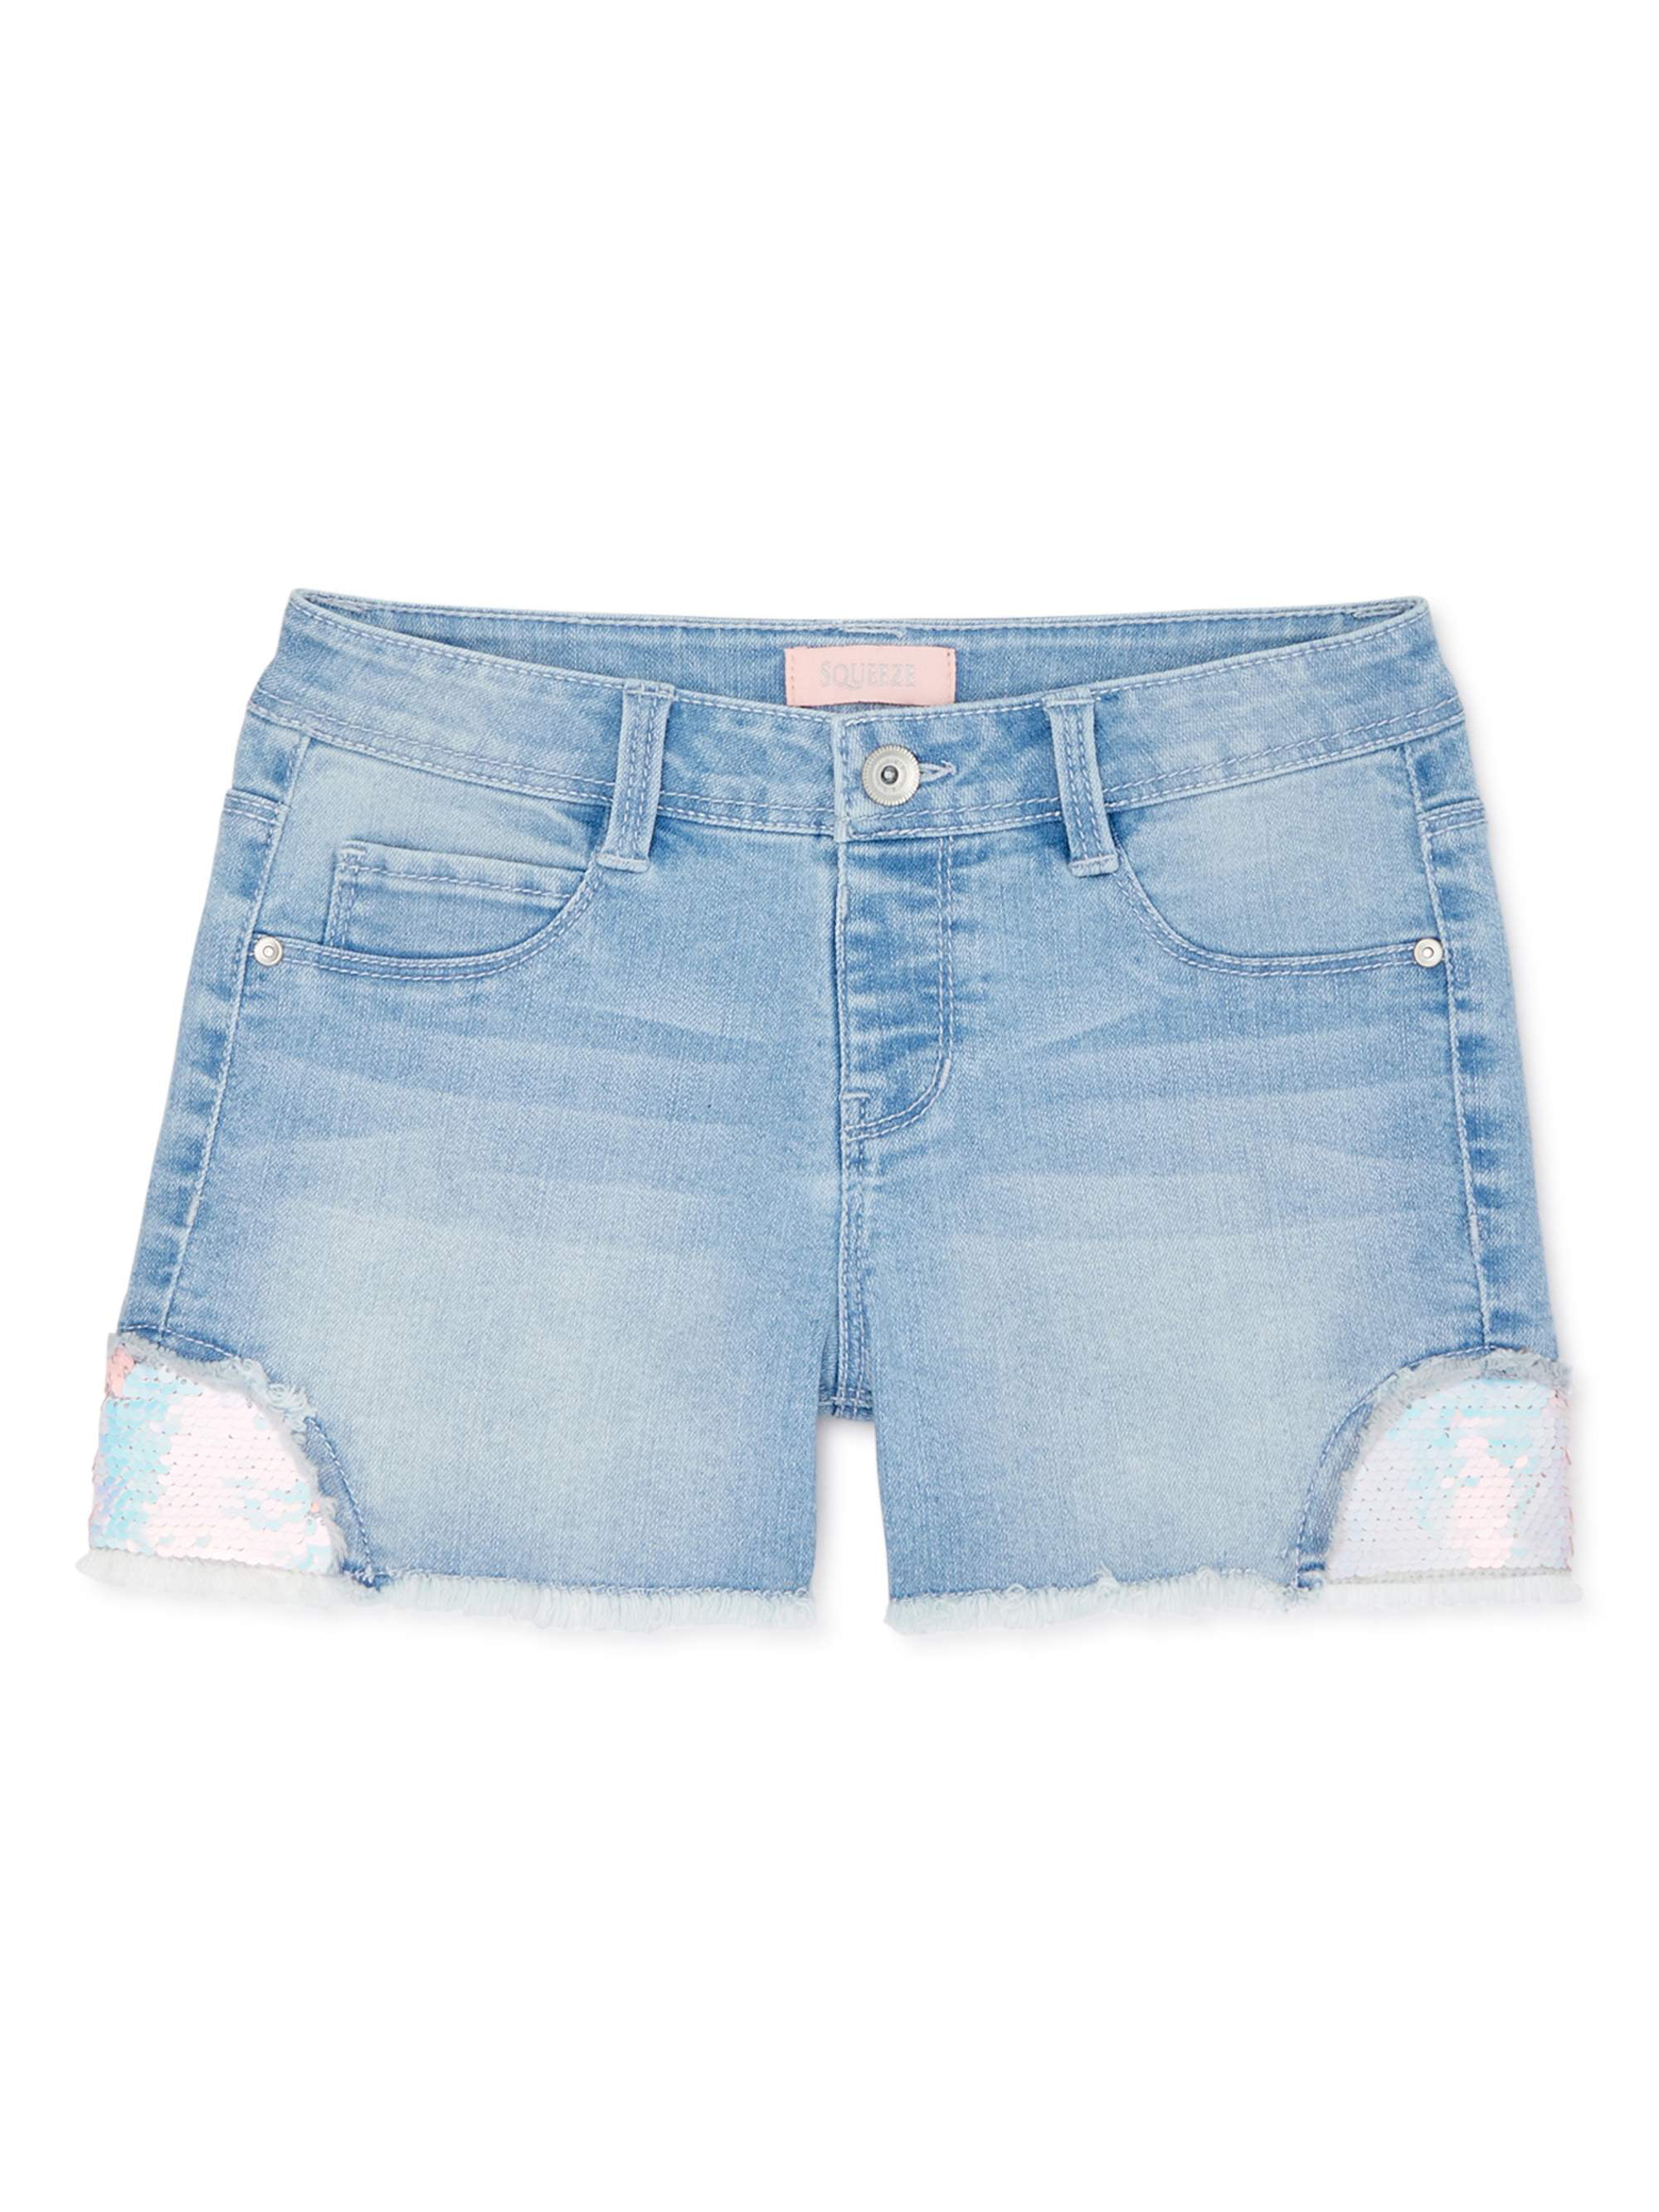 sparkly jean shorts